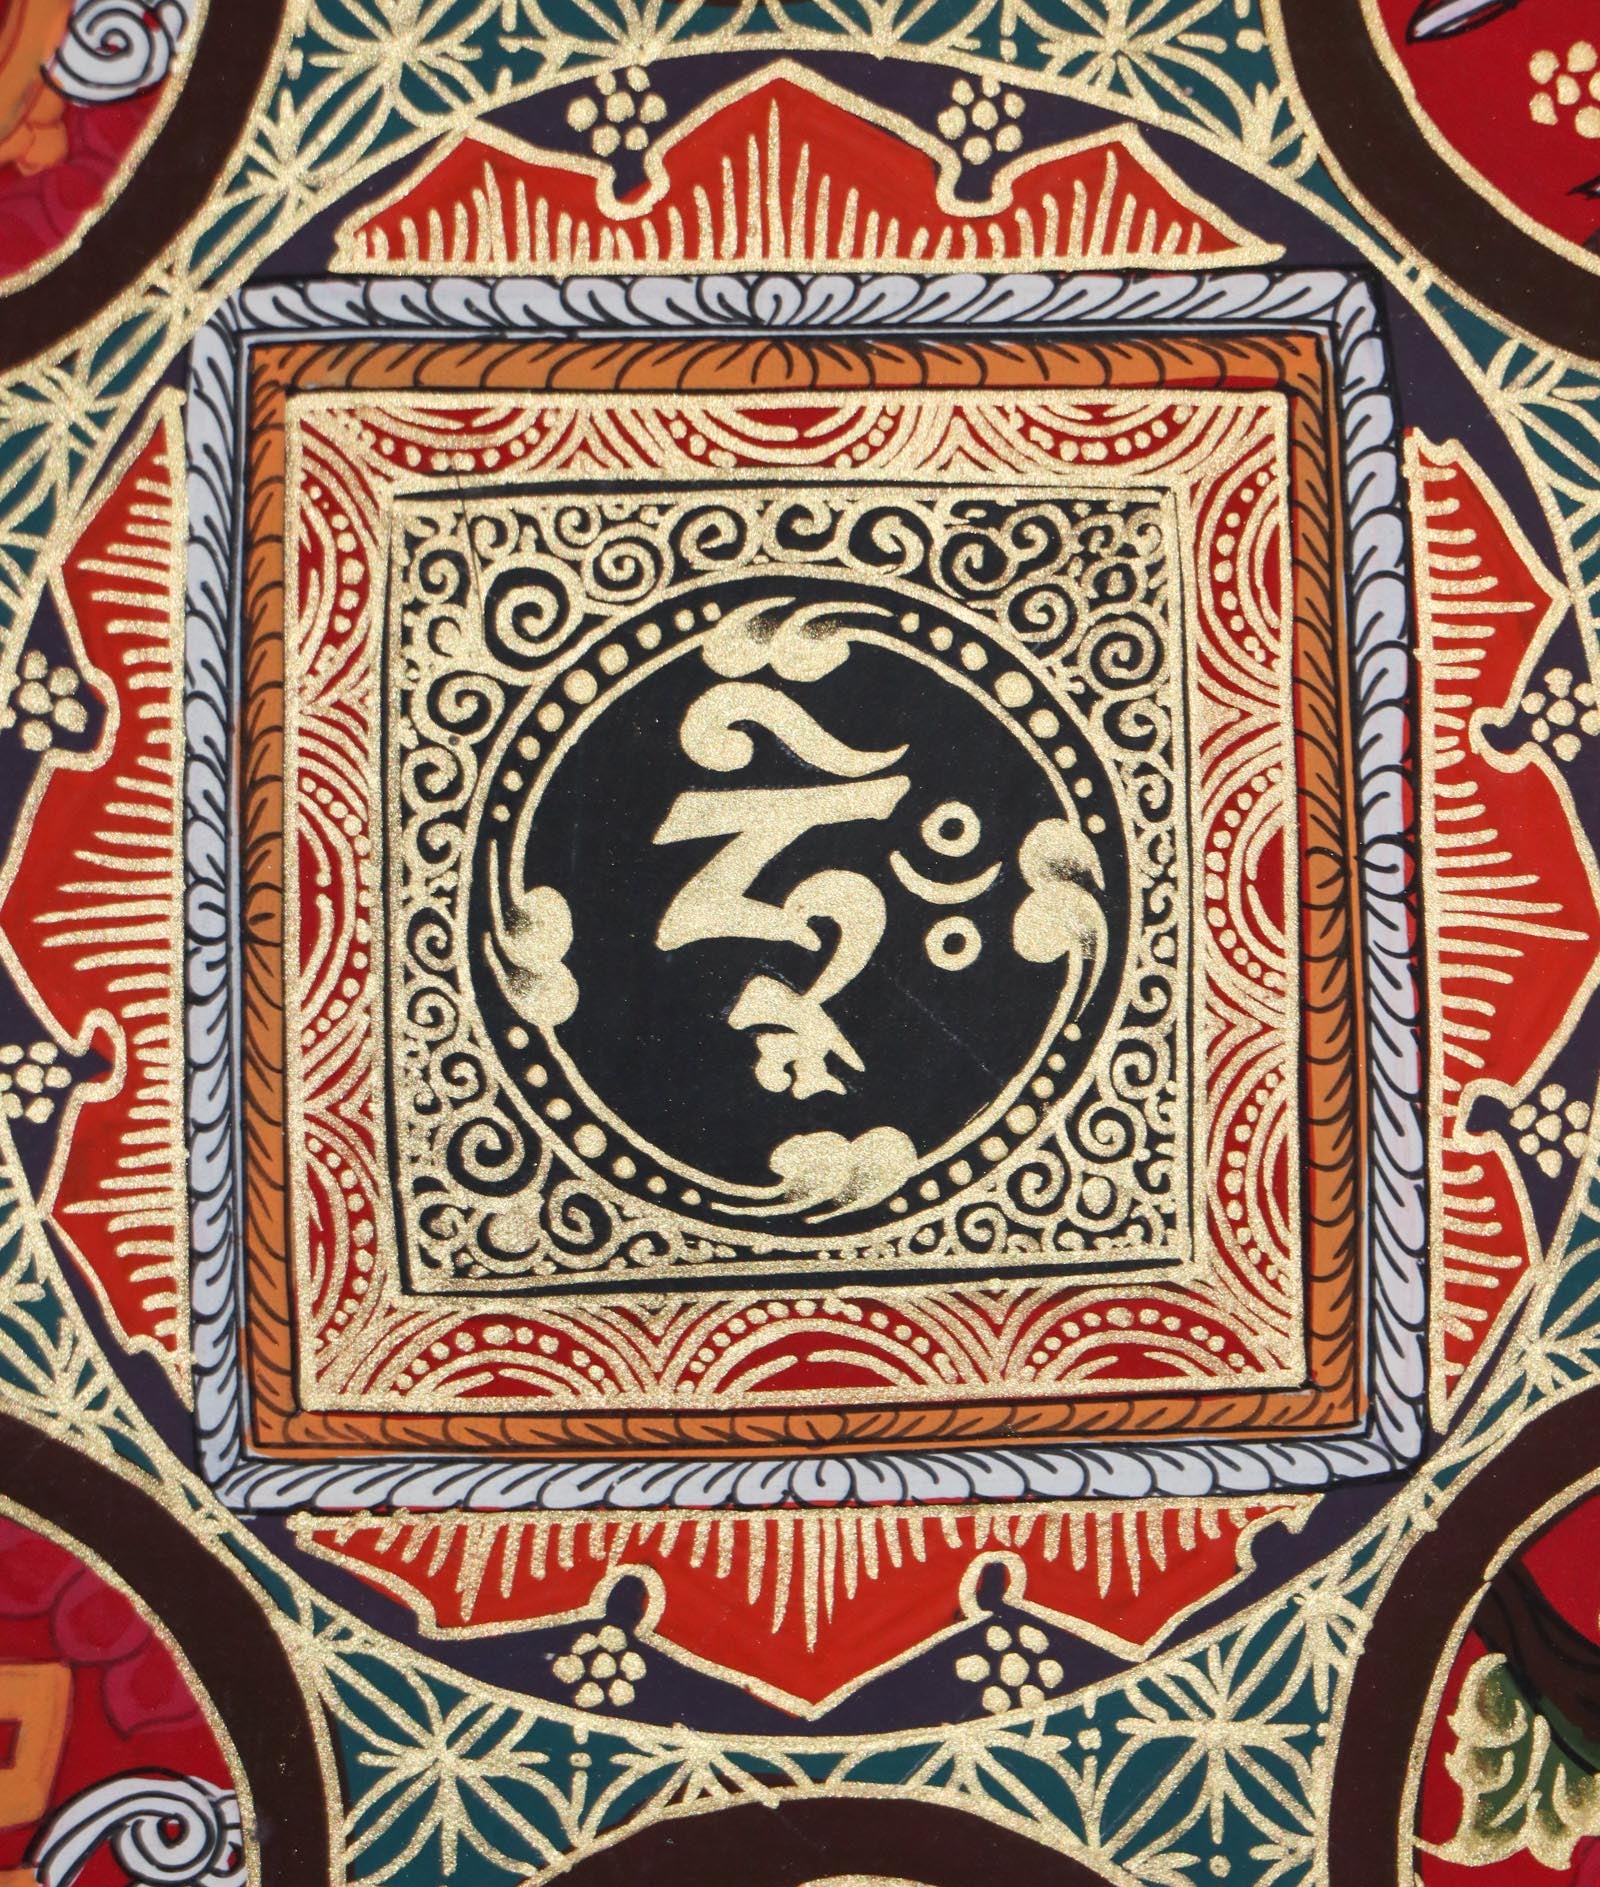 Handpainted black and gold Thangka painting.